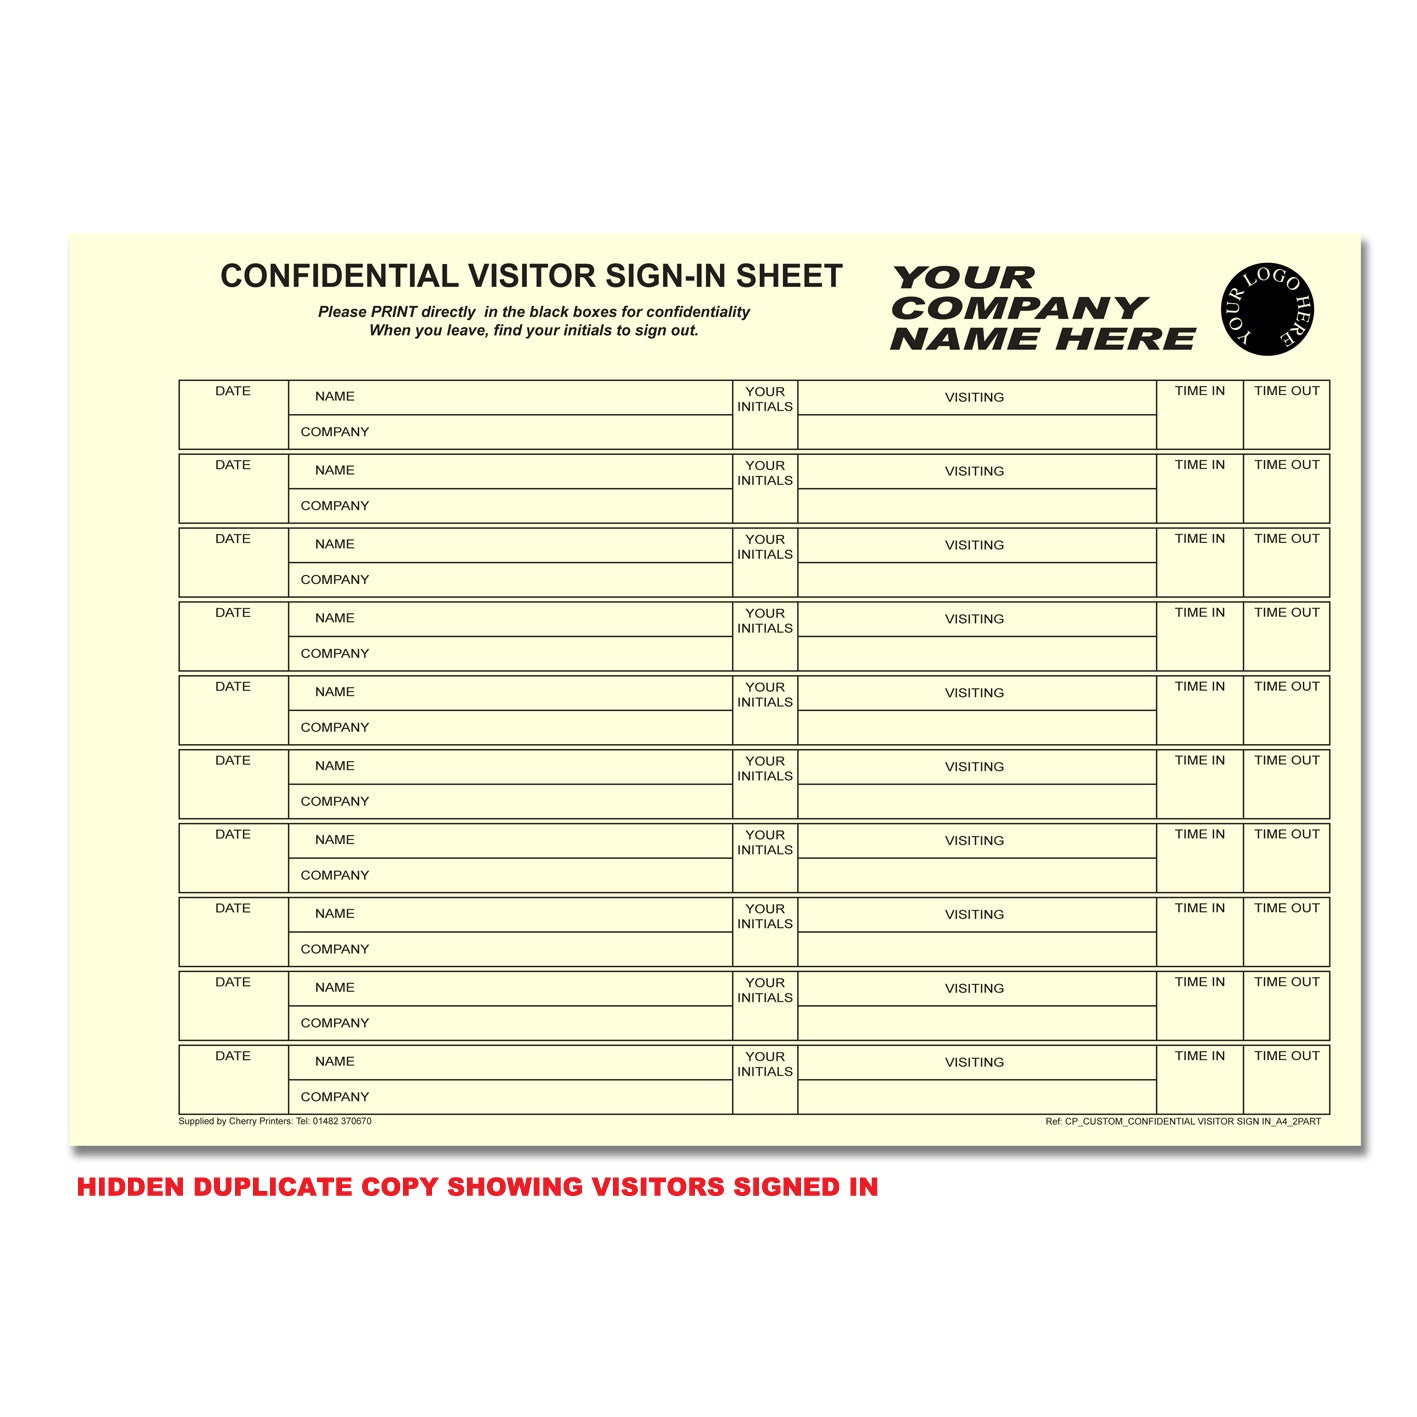 NCR *CUSTOM* Confidential Visitor Sign in Duplicate Wiro Book A4 50 sets GDPR | 2 Book Pack